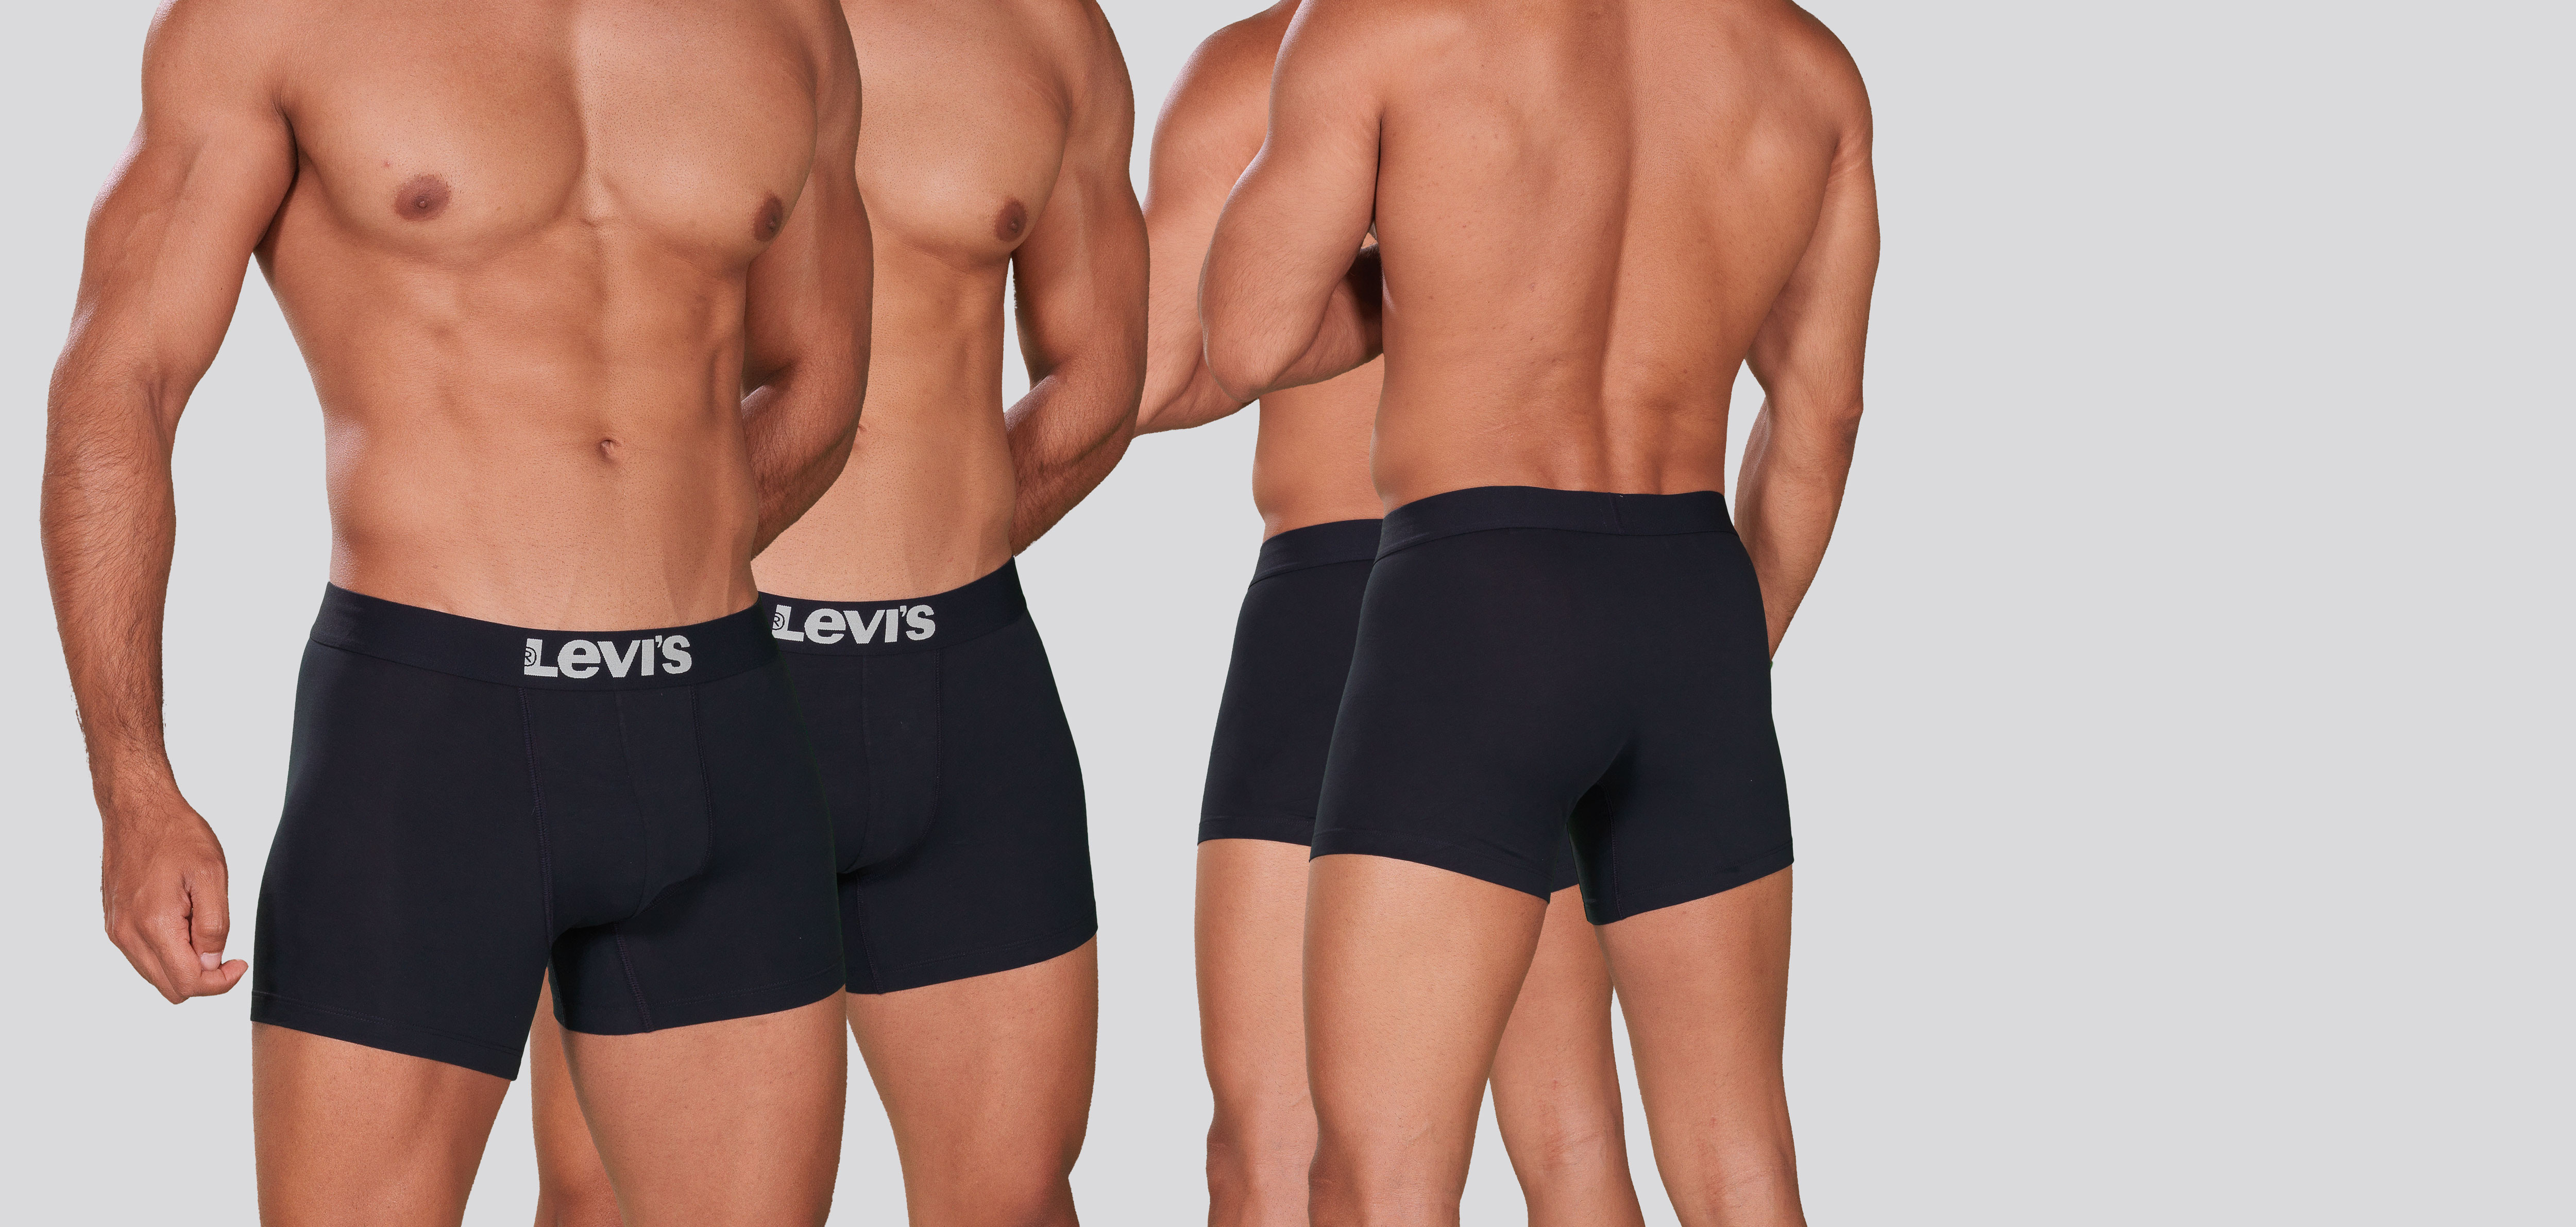 Levi_s Solid Basic Boxer Brief 2-Pack 1001, color Nee